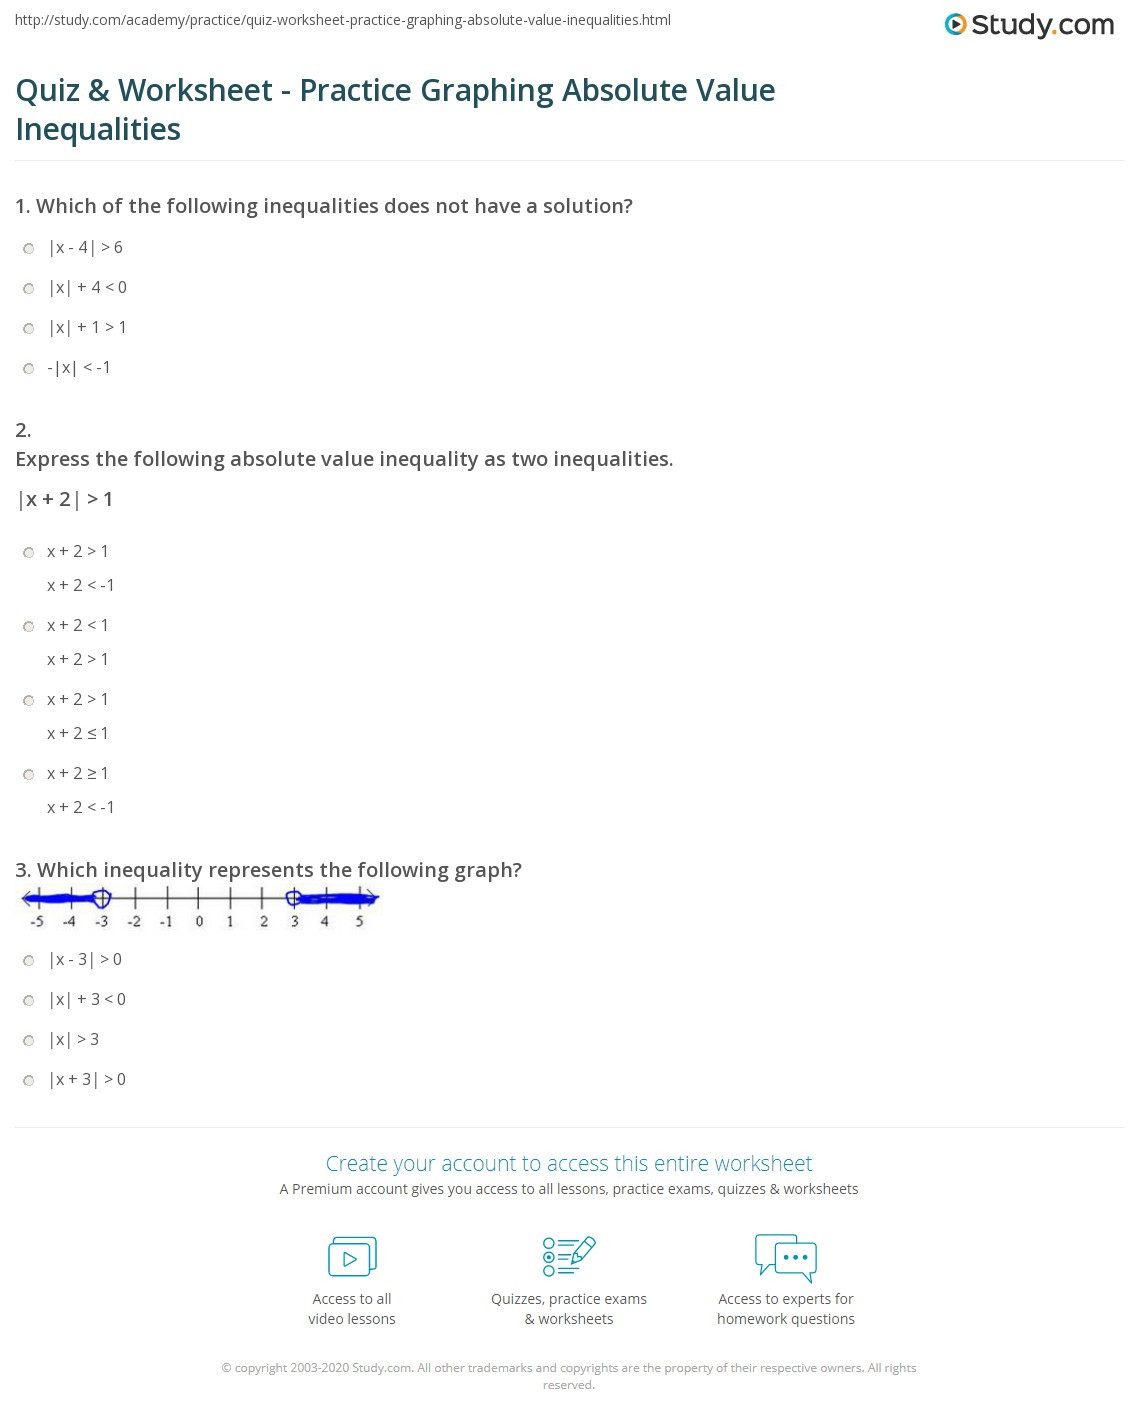 Absolute Value Equations Worksheet Quiz &amp; Worksheet Practice Graphing Absolute Value